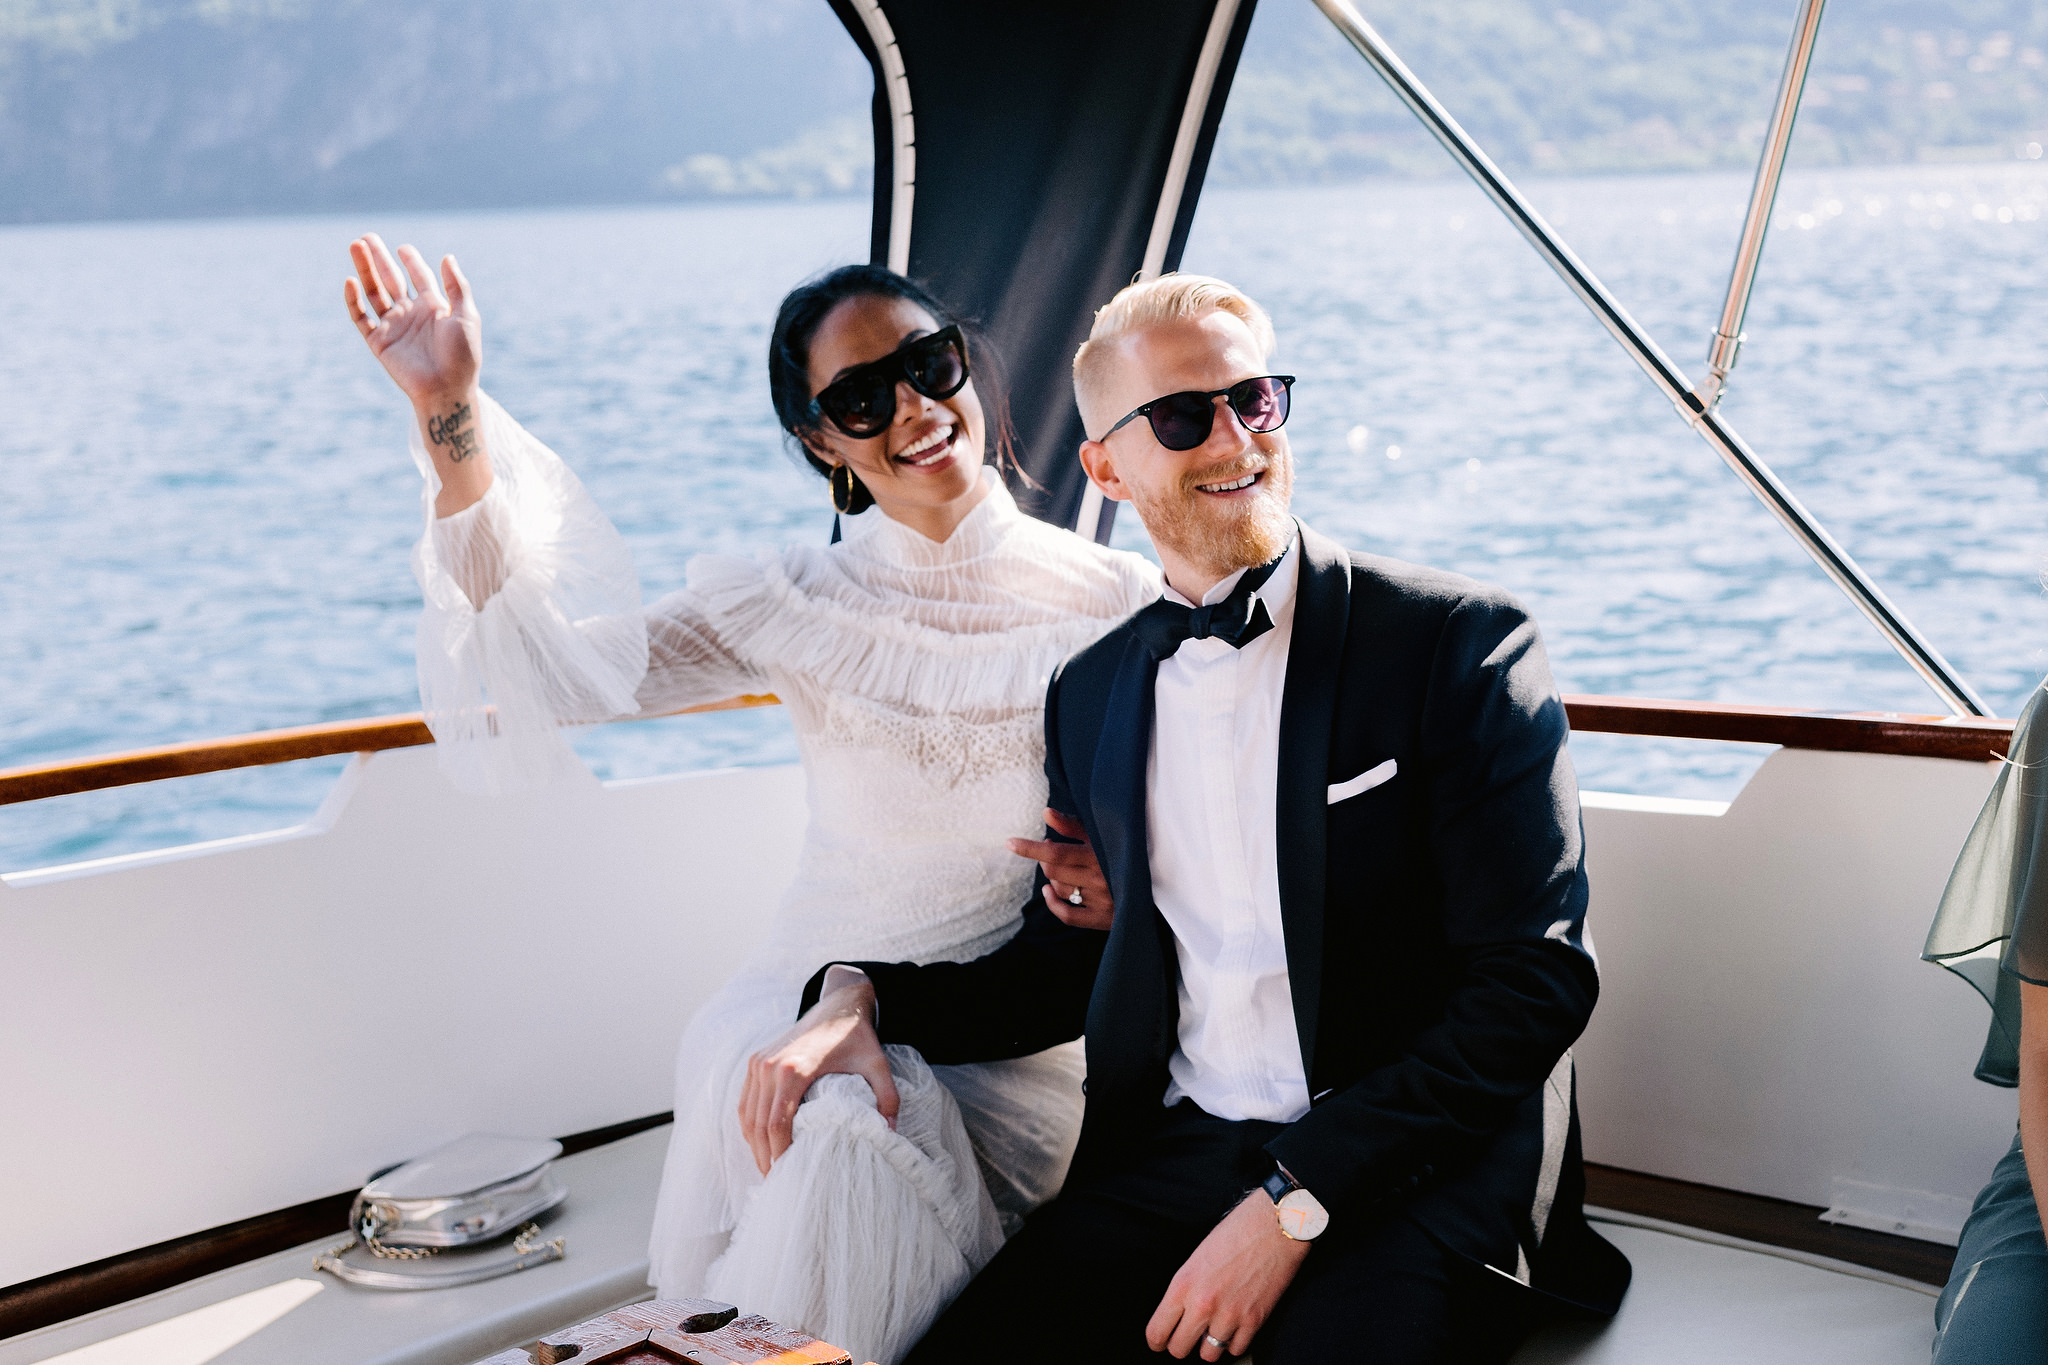 The newlyweds are cruising in Italy's lake. Destination Image by Jenny Fu Studio